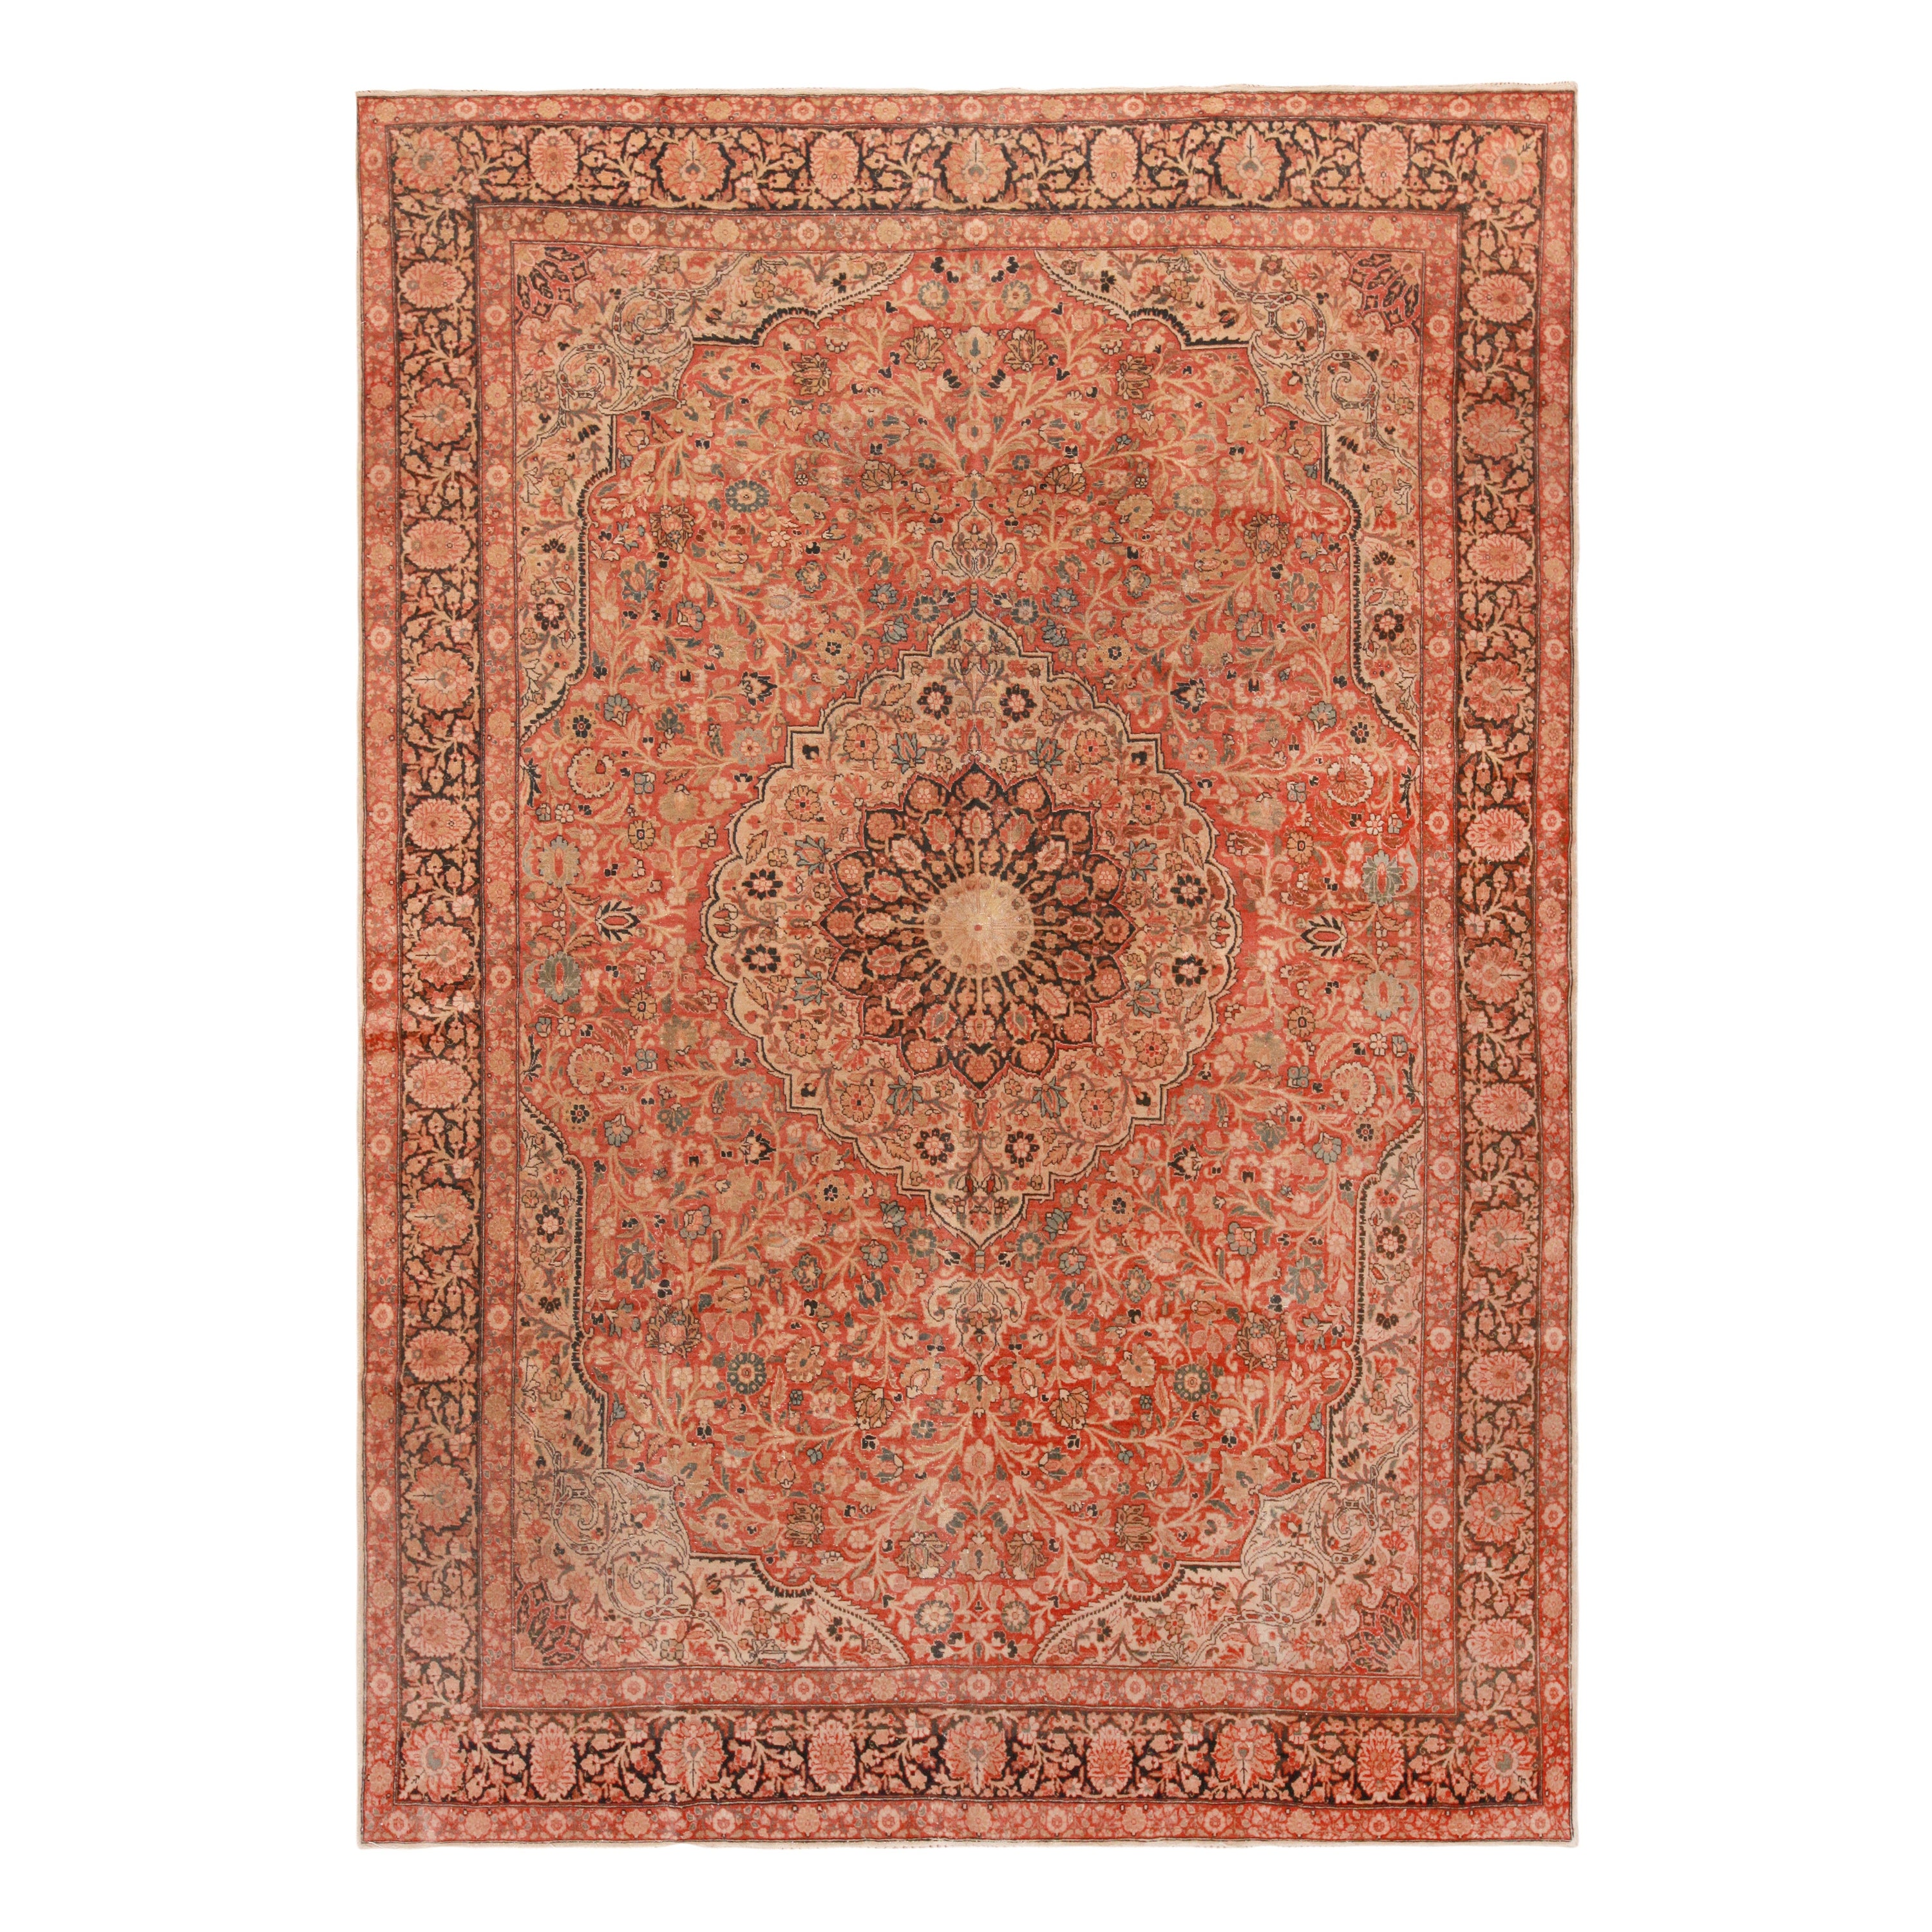 Extremely Impressive Antique Persian Tabriz Floral Area Rug 8'4" x 11'8"